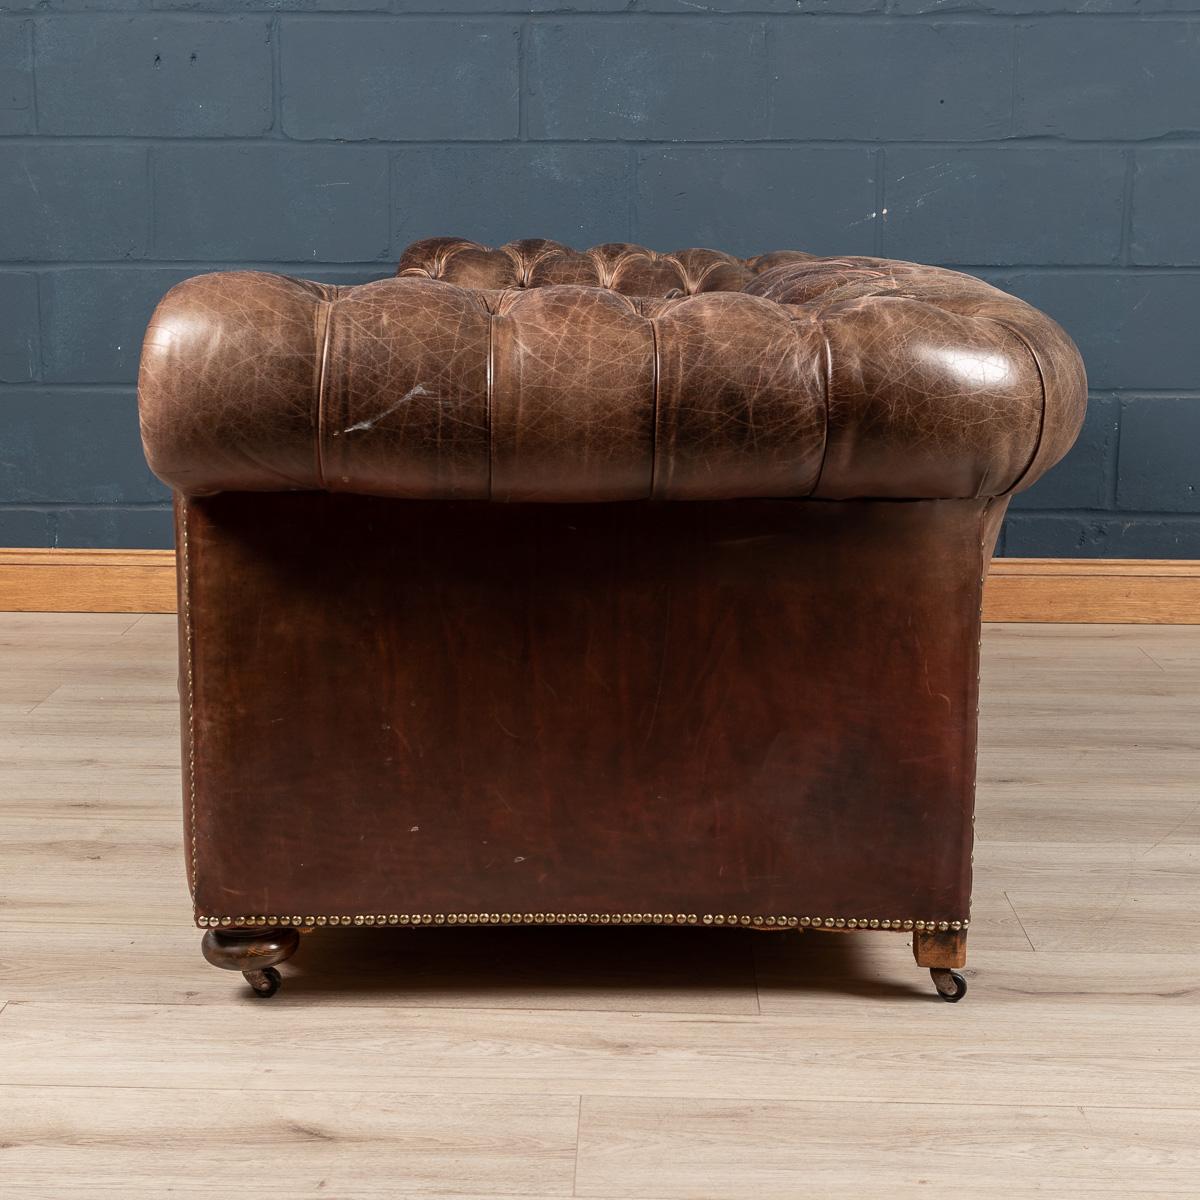 Superb leather chesterfield sofa, hand dyed, early 20th century. One of the most elegant models with button down seating, the Chesterfield sofa remains as fashionable now as it has ever been, capable of uplifting the interior space of any